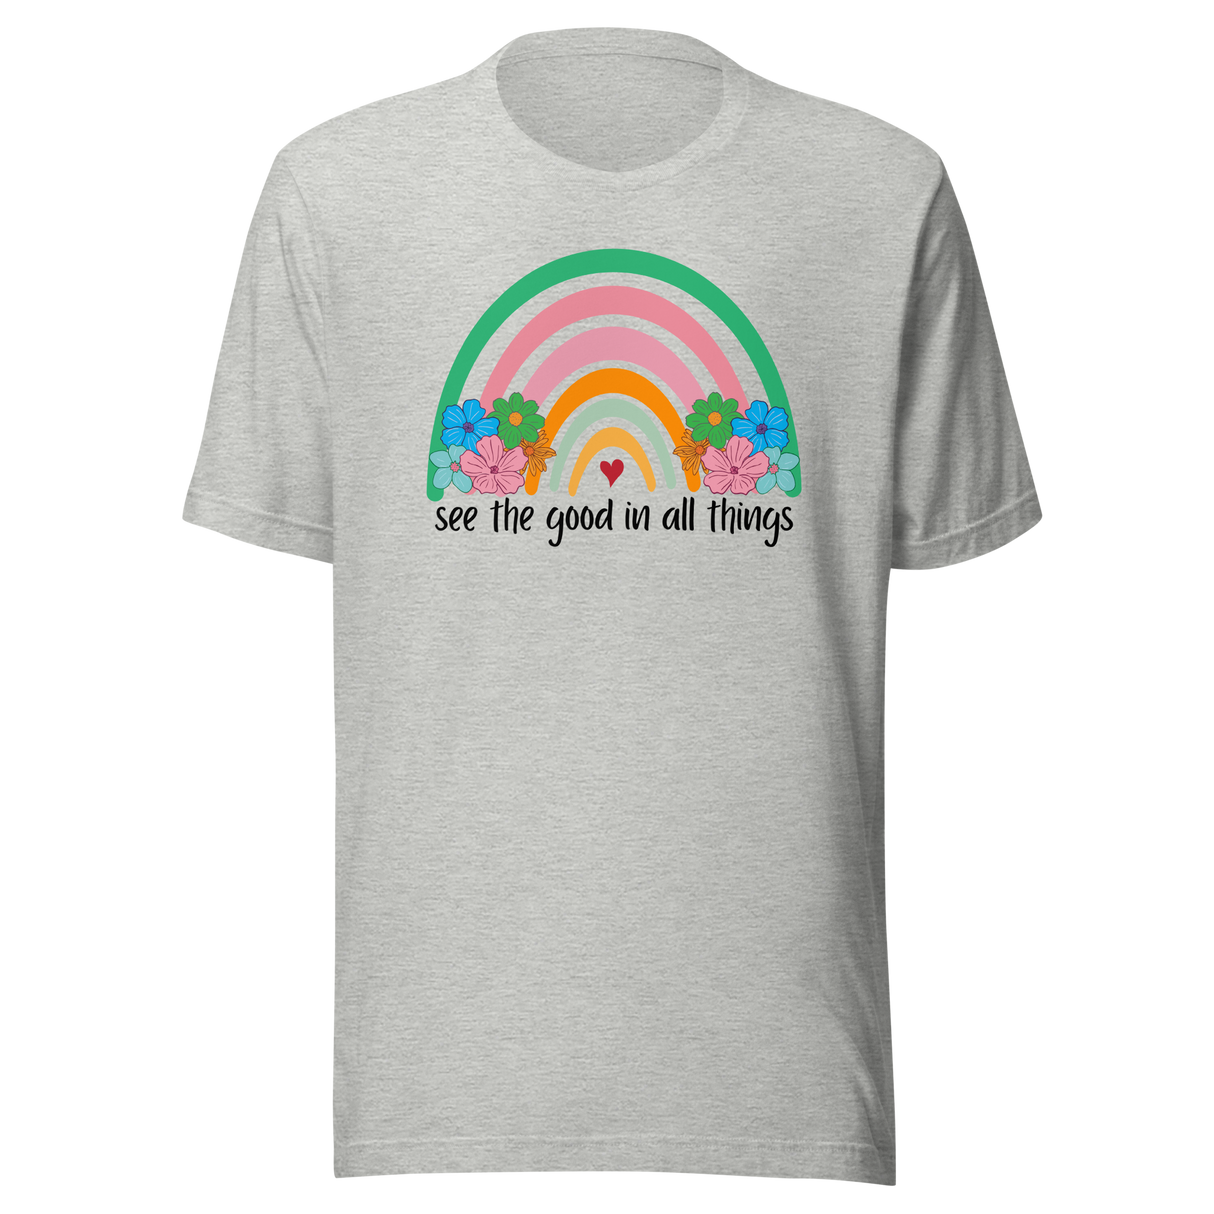 see-the-good-in-all-things-life-tee-motivational-t-shirt-positive-tee-optimism-t-shirt-gratitude-tee#color_athletic-heather